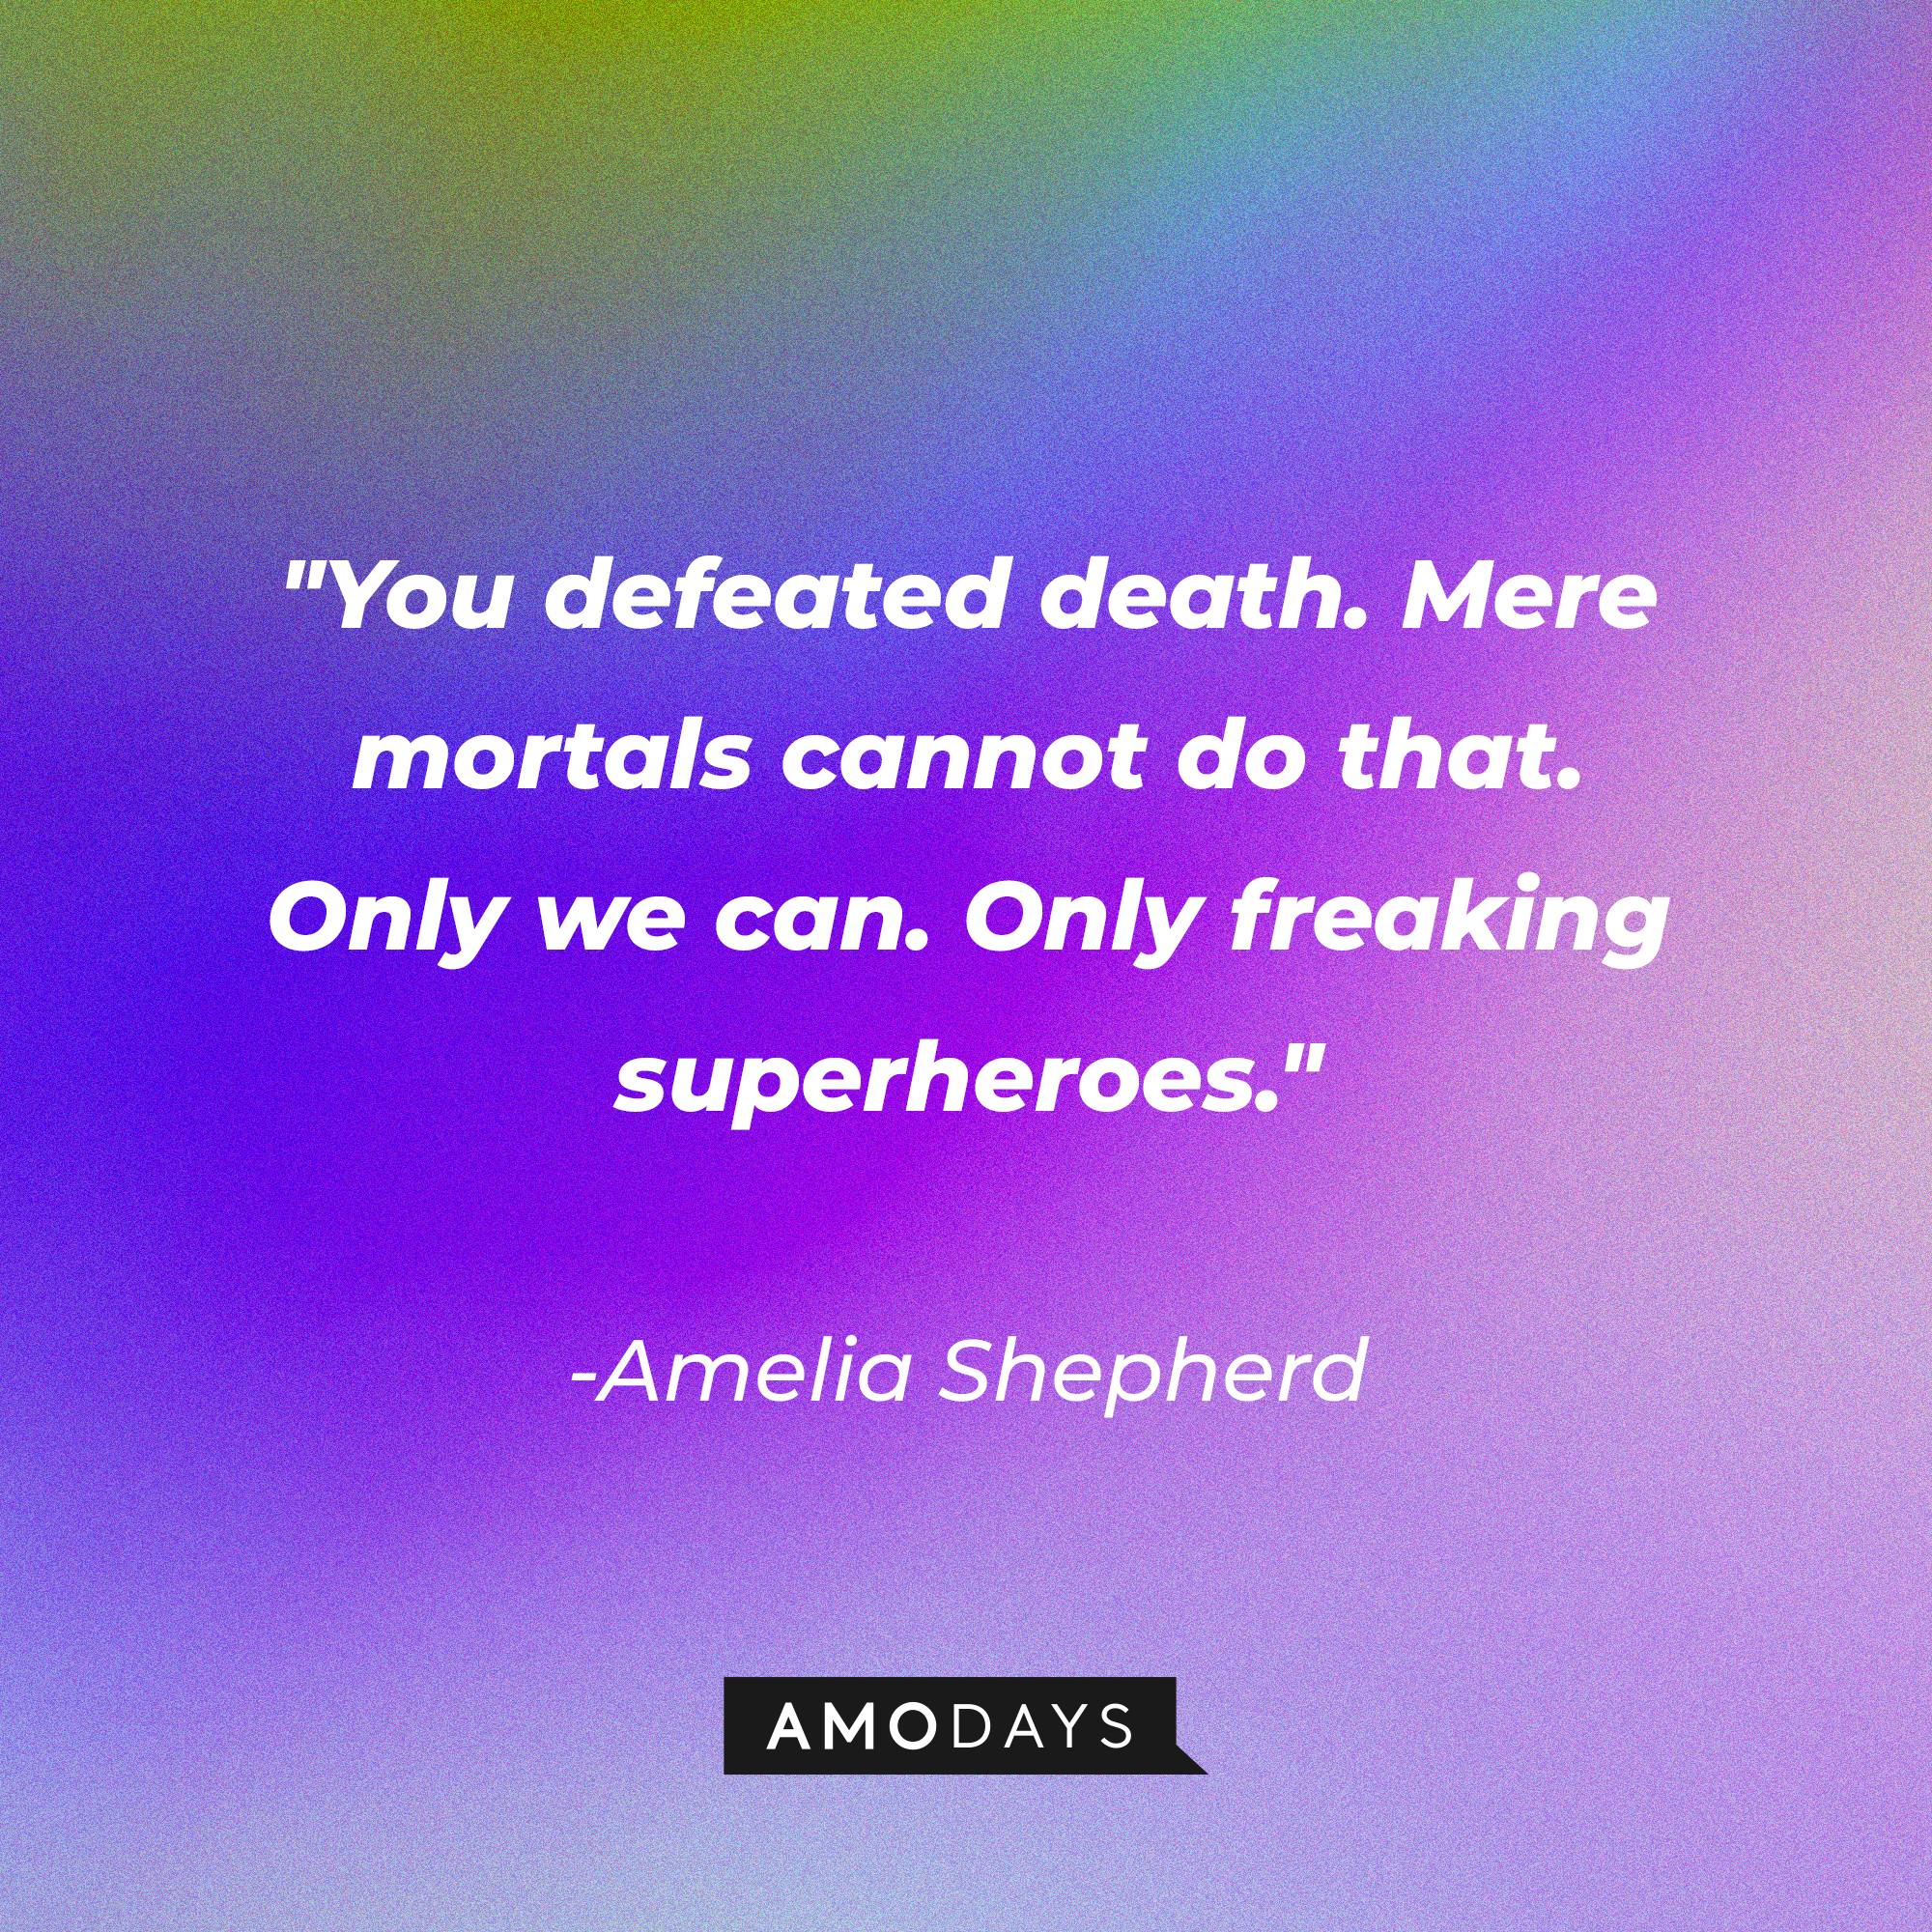 Amelia Shepherd's quote: "You defeated death. Mere mortals cannot do that. Only we can. Only freaking superheroes." | Source: AmoDays